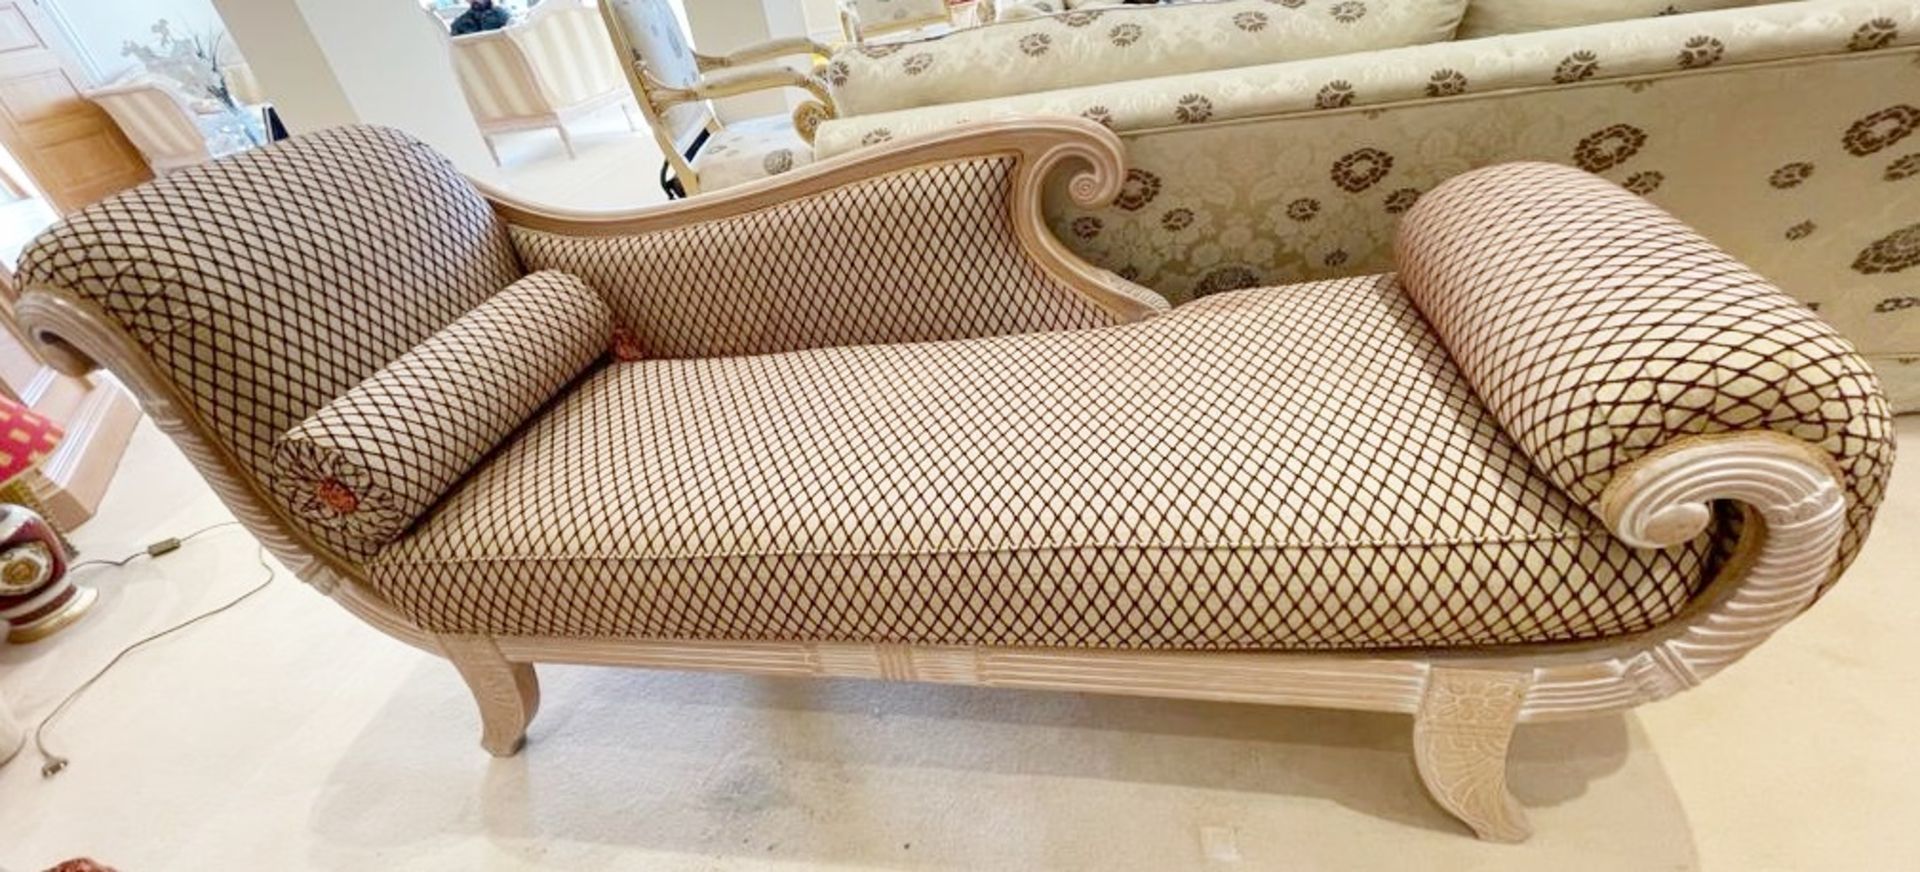 1 x Elegant Chaise Longue Sofa With Carved Wooden Frame, Scroll End and Diamond  Pattern Fabric - NO - Image 3 of 16